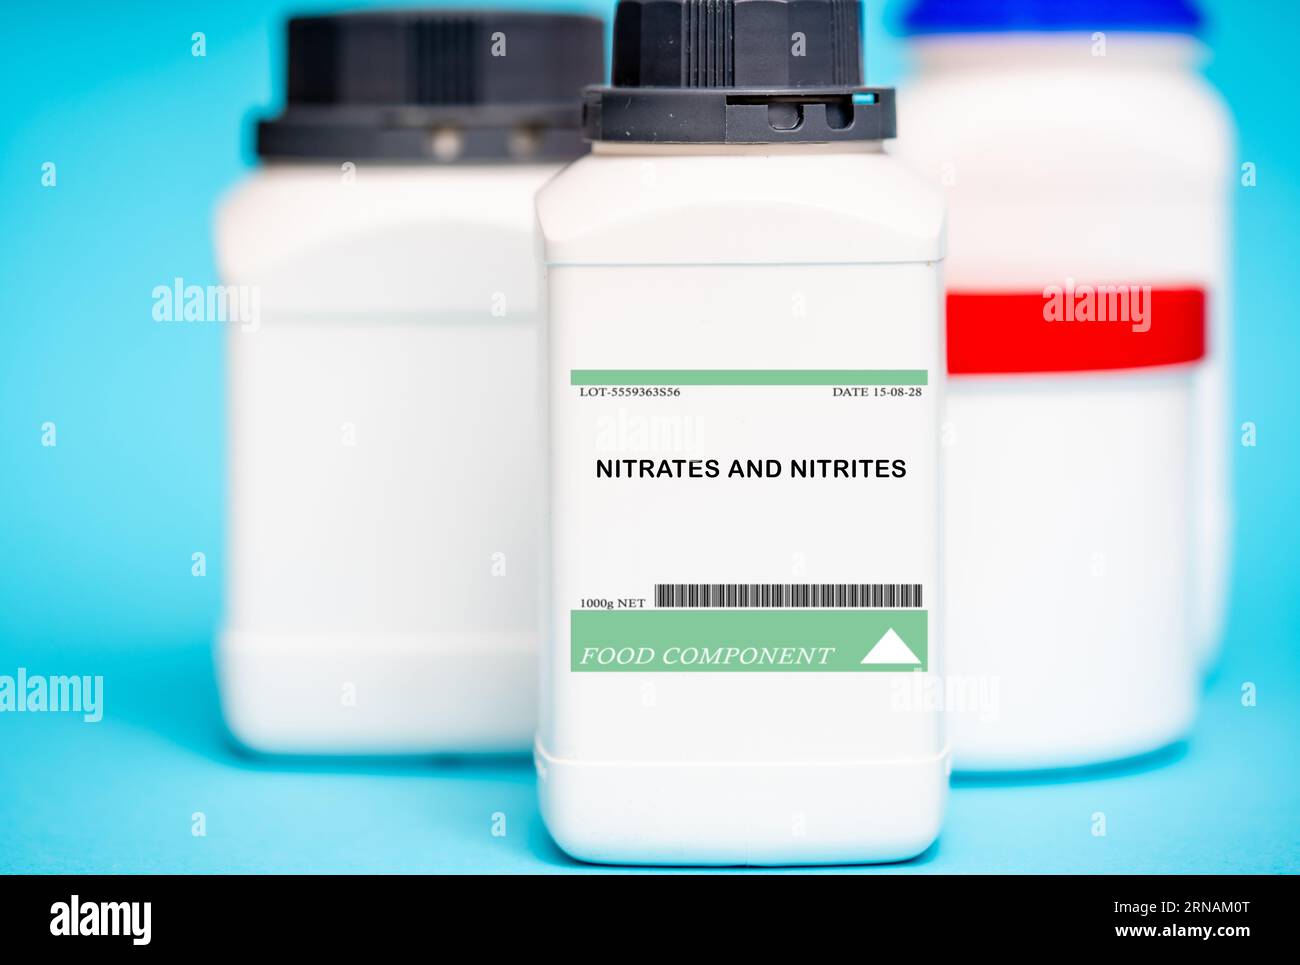 Nitrates and nitrites are preservatives commonly used in cured meats, such as bacon and ham, to prevent bacterial growth and enhance color. They are t Stock Photo